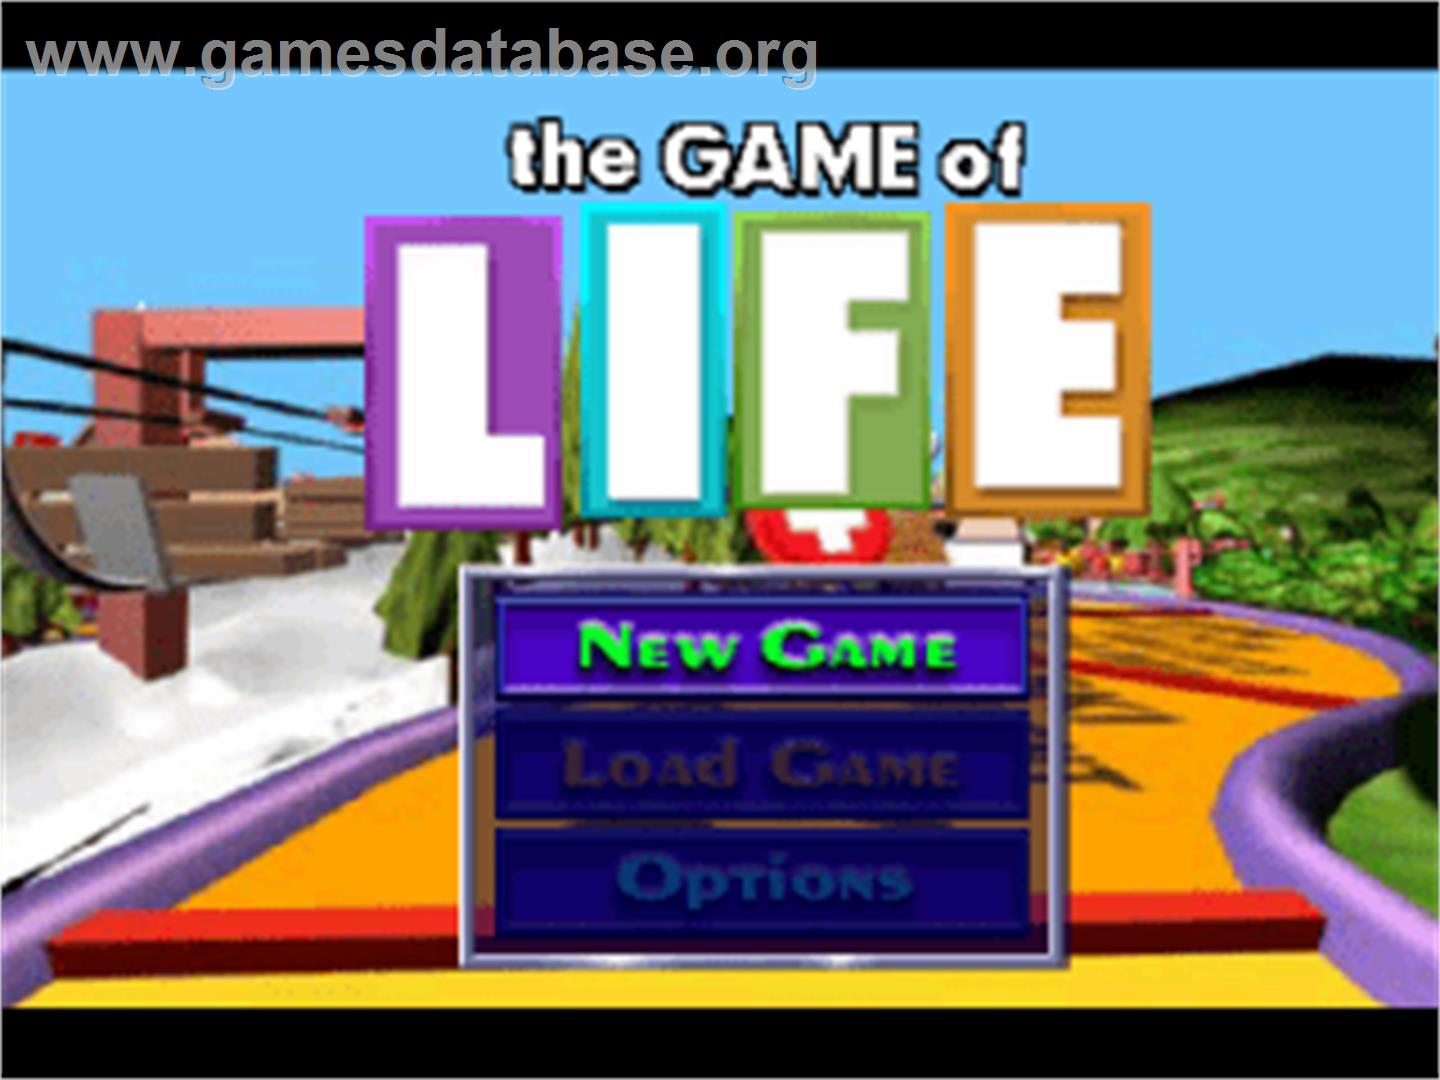 The Game of Life - Sony Playstation - Artwork - Title Screen